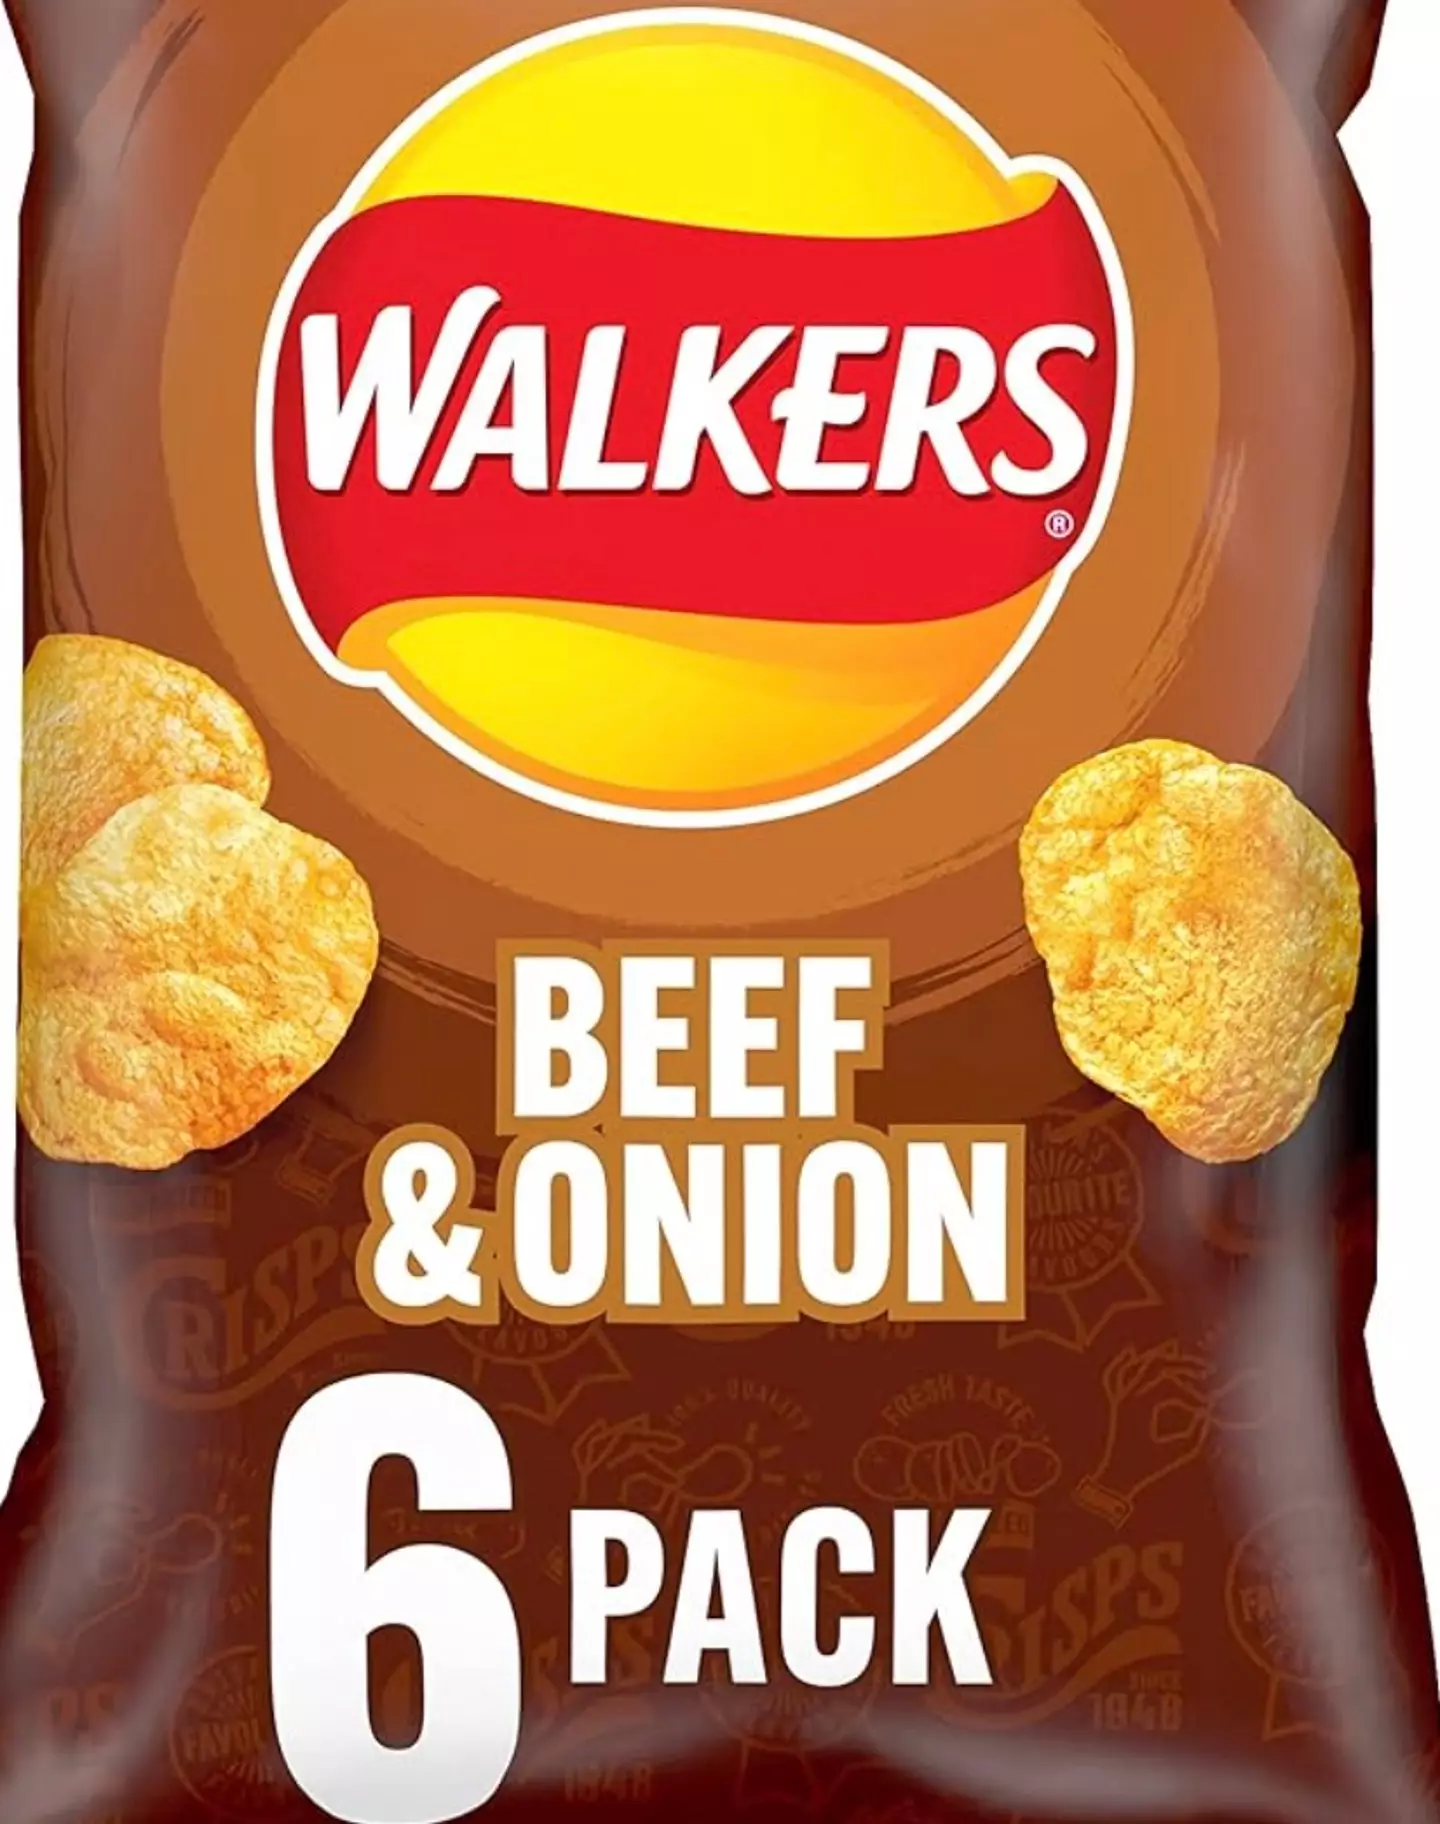 Beef and Onion Walkers are no more.